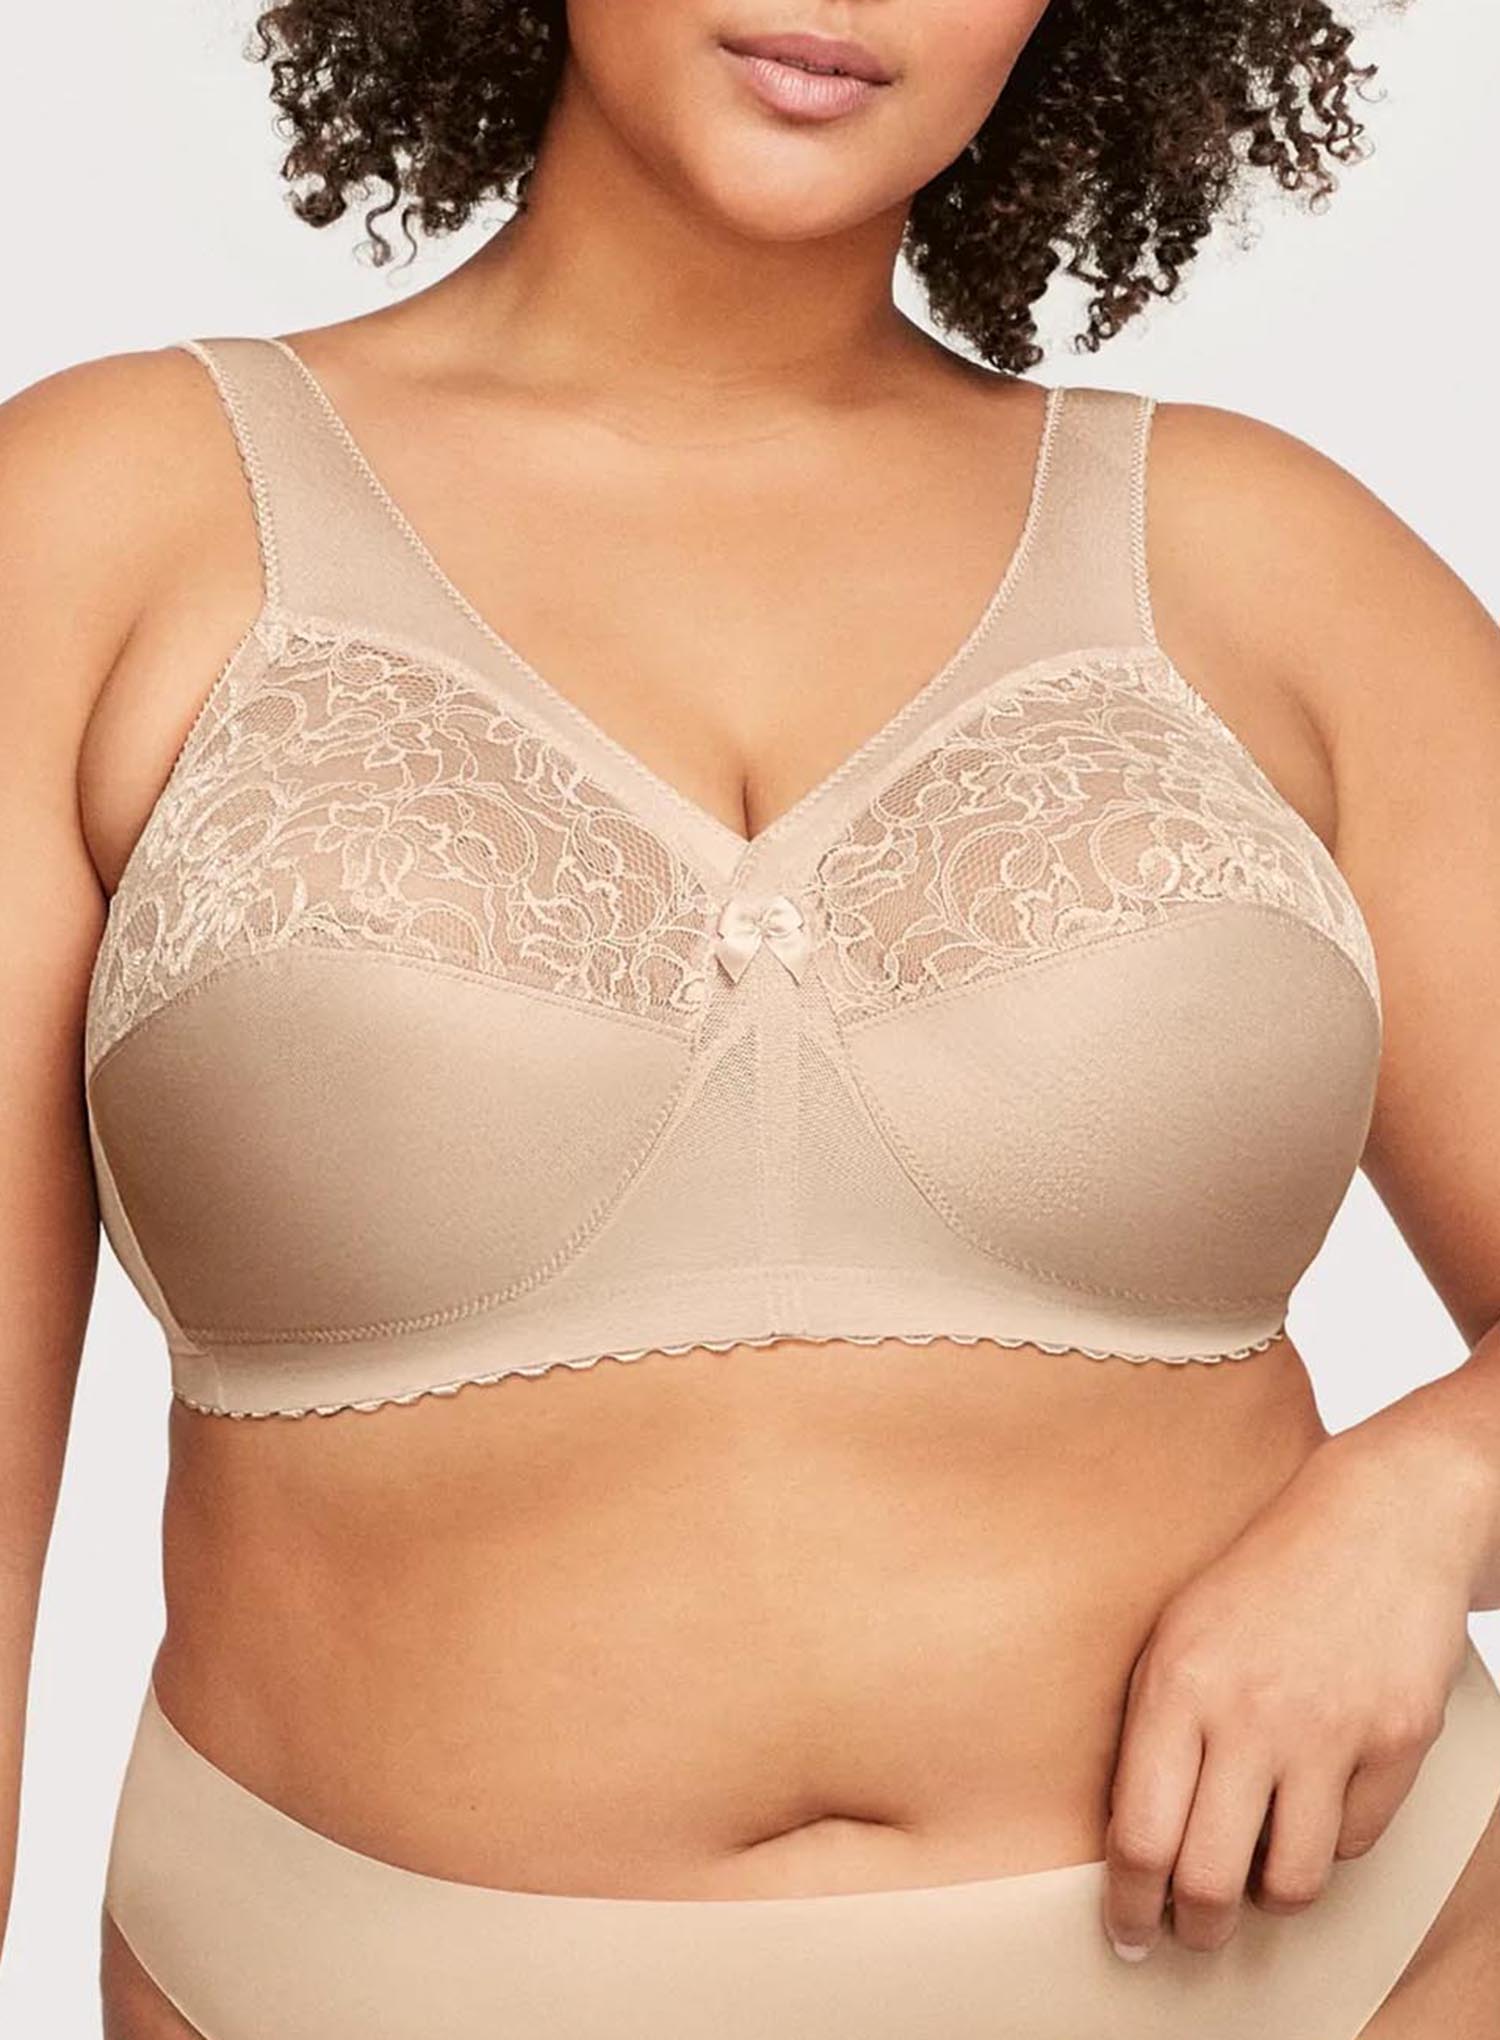 Glamorise - There should be pretty + supportive bras in every size